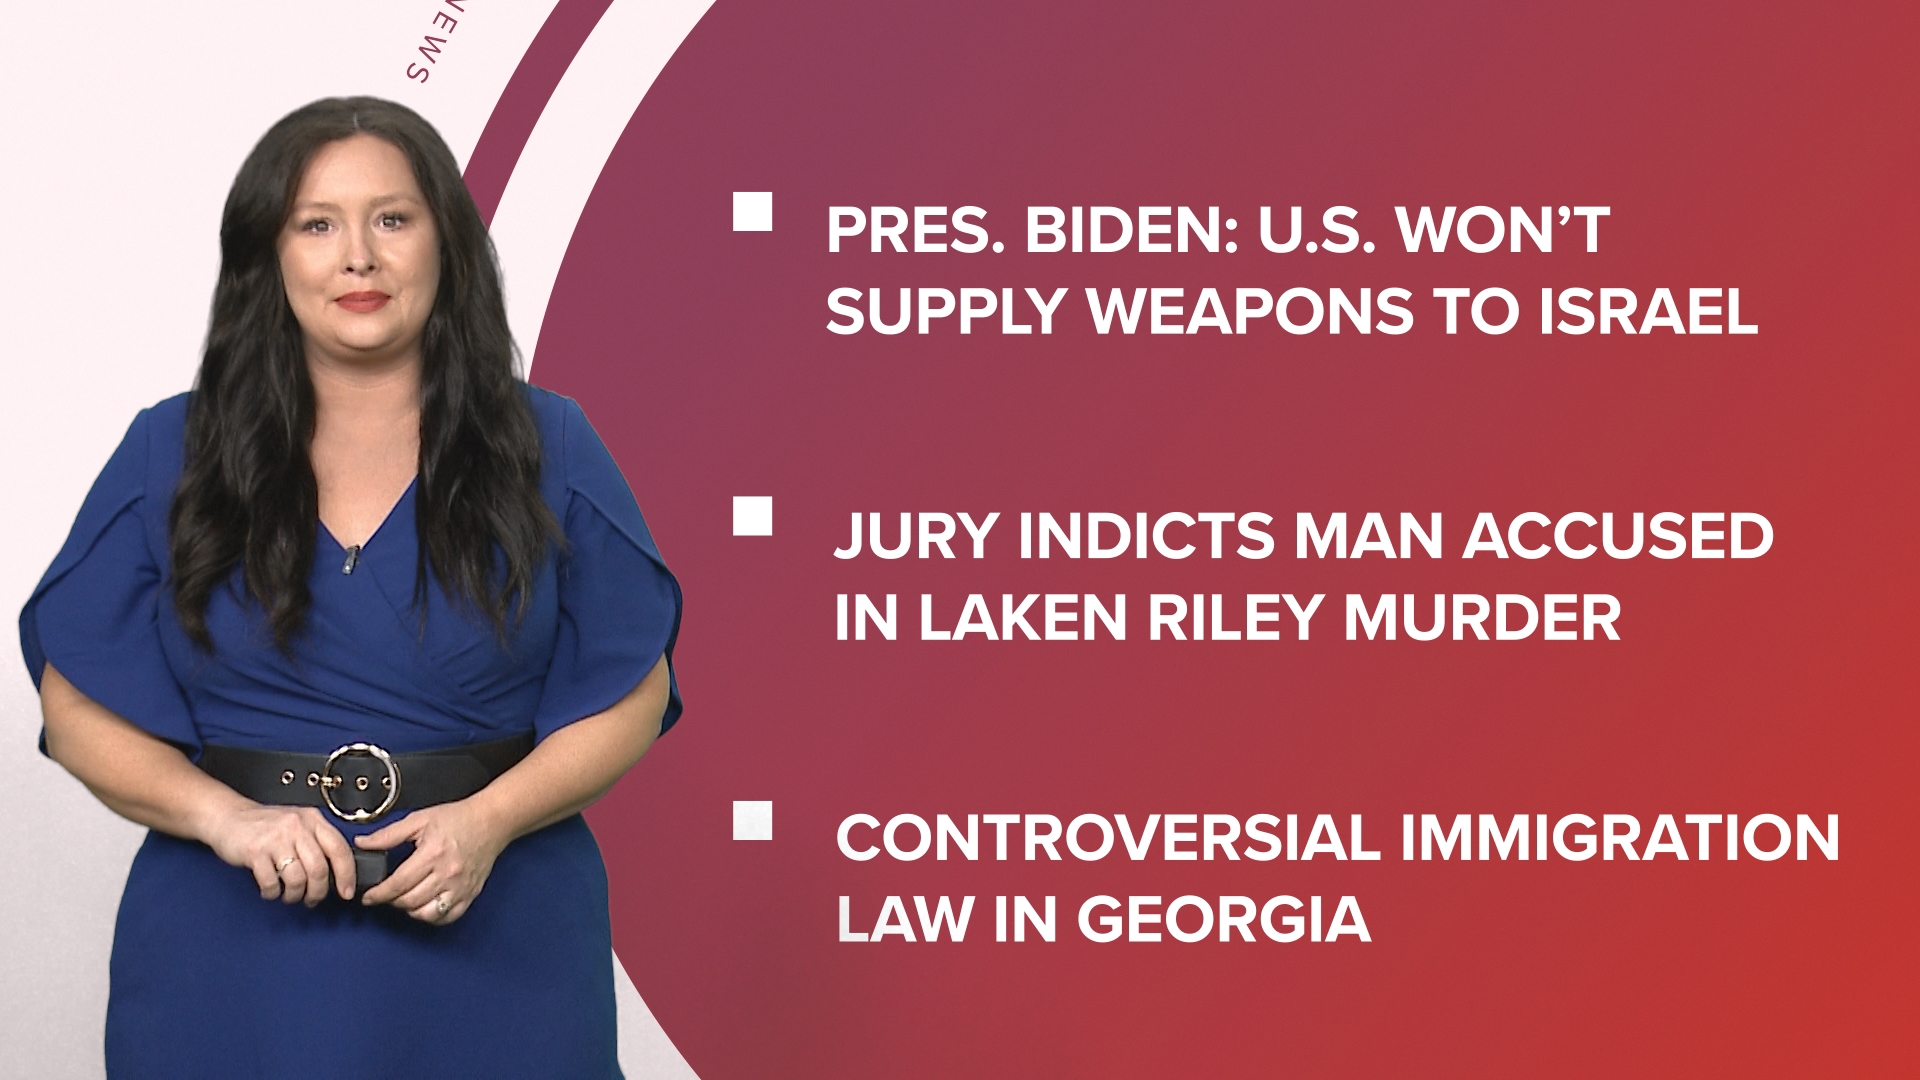 A look at what is happening in the news from Pres. Biden vowing to not provide weapons to Israel if they attack Rafah to severe weather in the South and more.